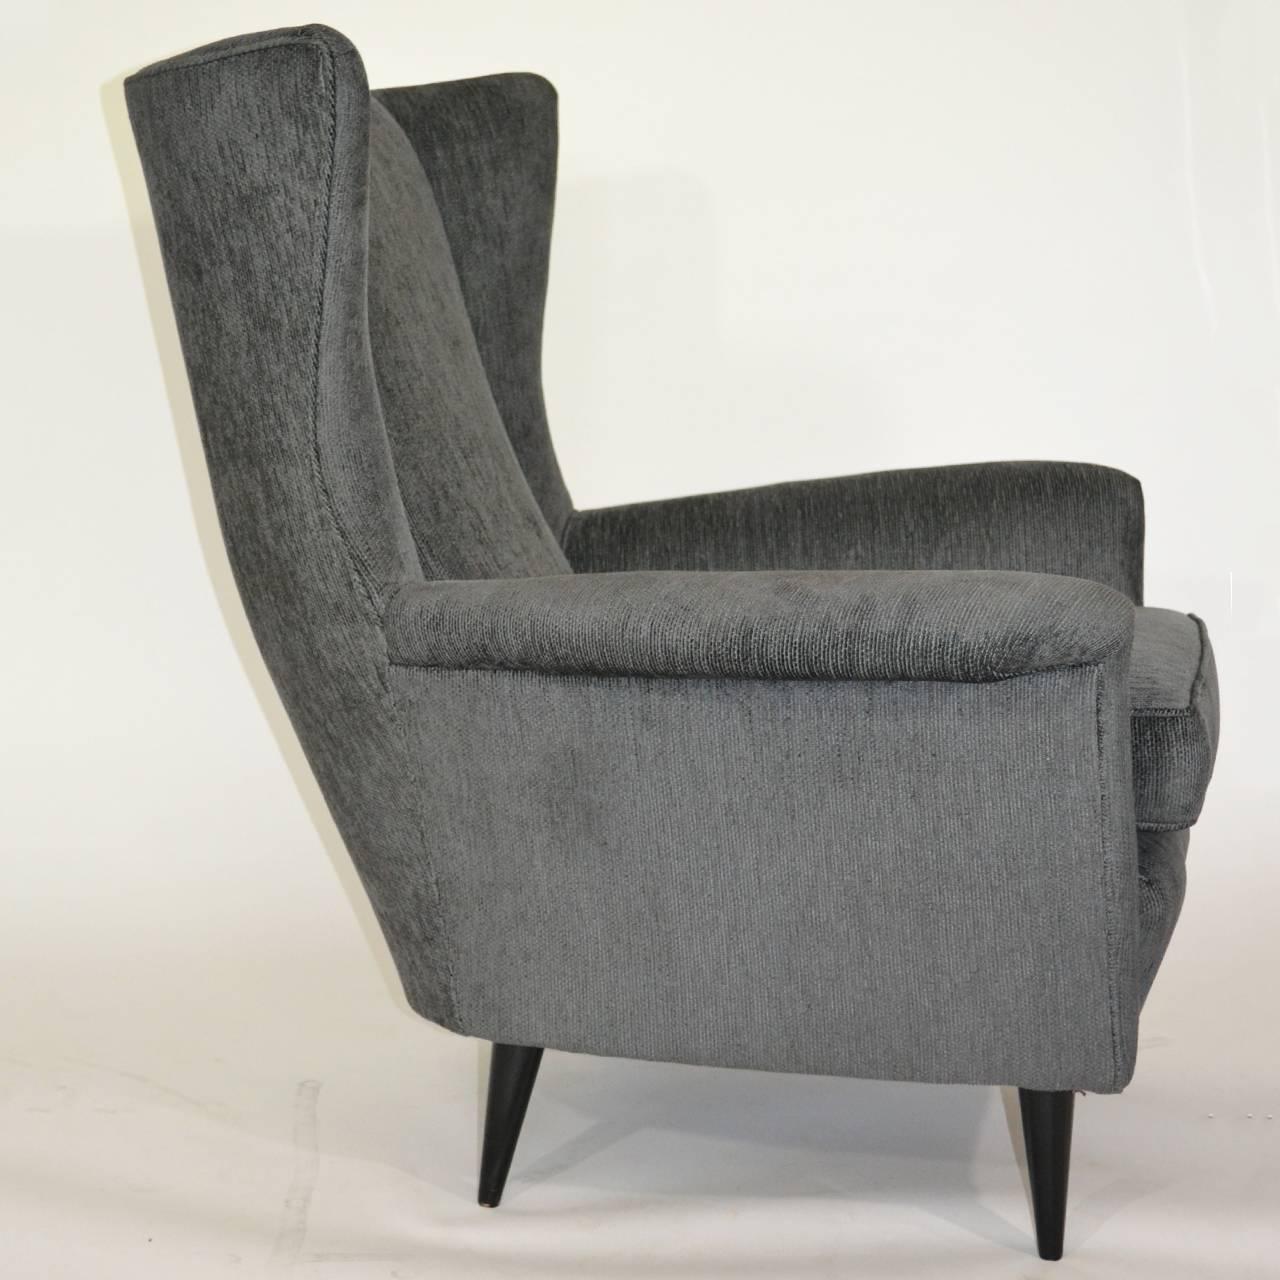 Pair of Italian grey velvet wings armchairs on cone legs from the 1950s.